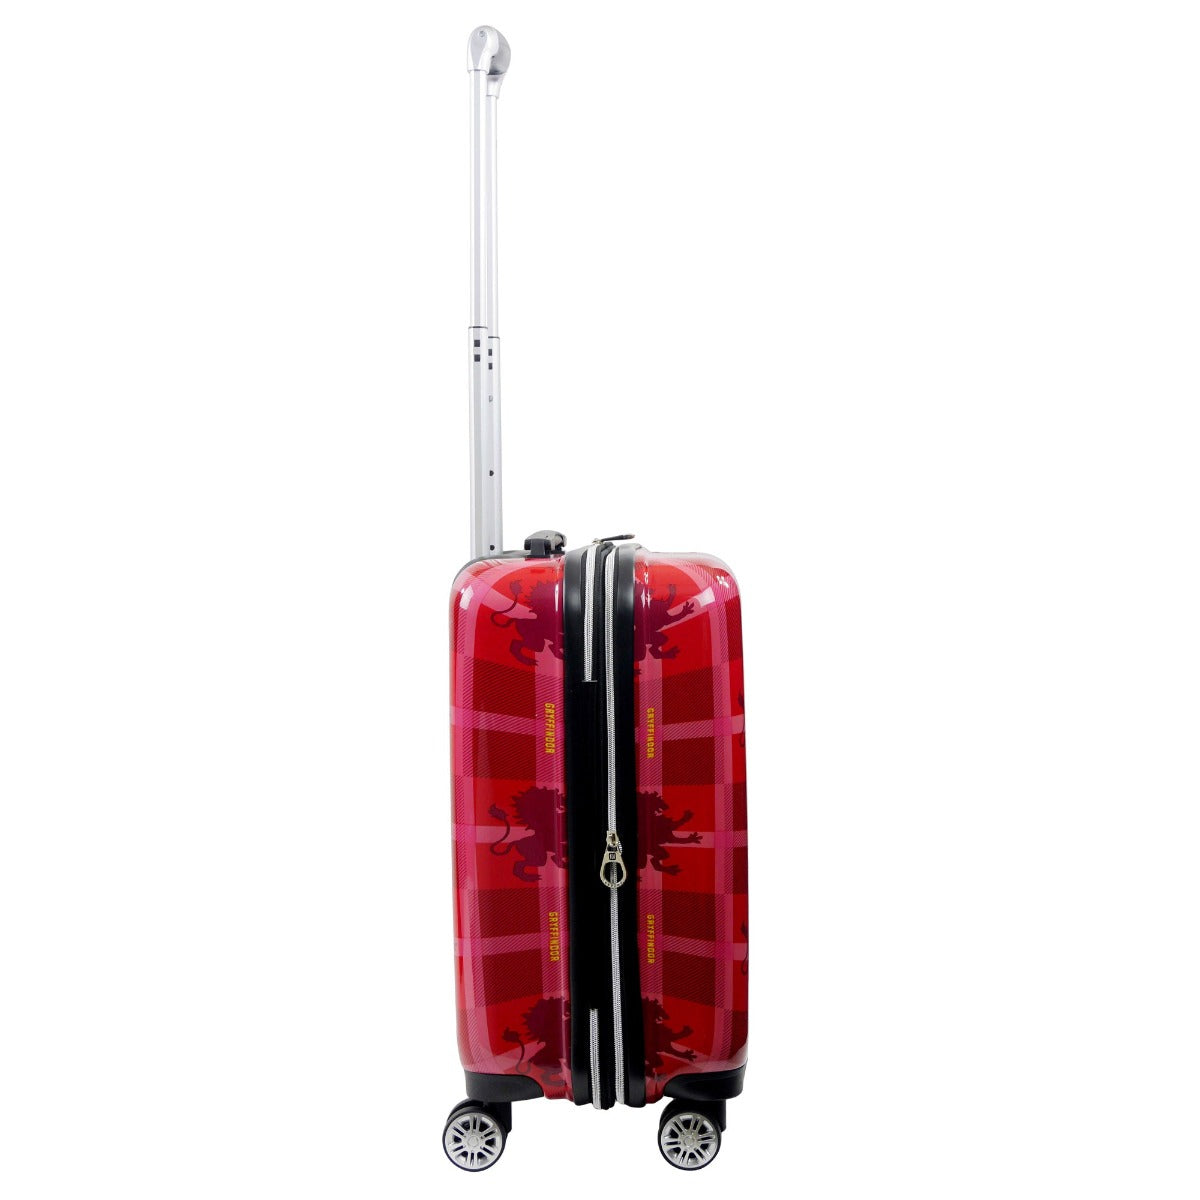 Red Harry Potter Gryffindor 22 inch hardside spinner luggage - best carry-on suitcase for kids and adults